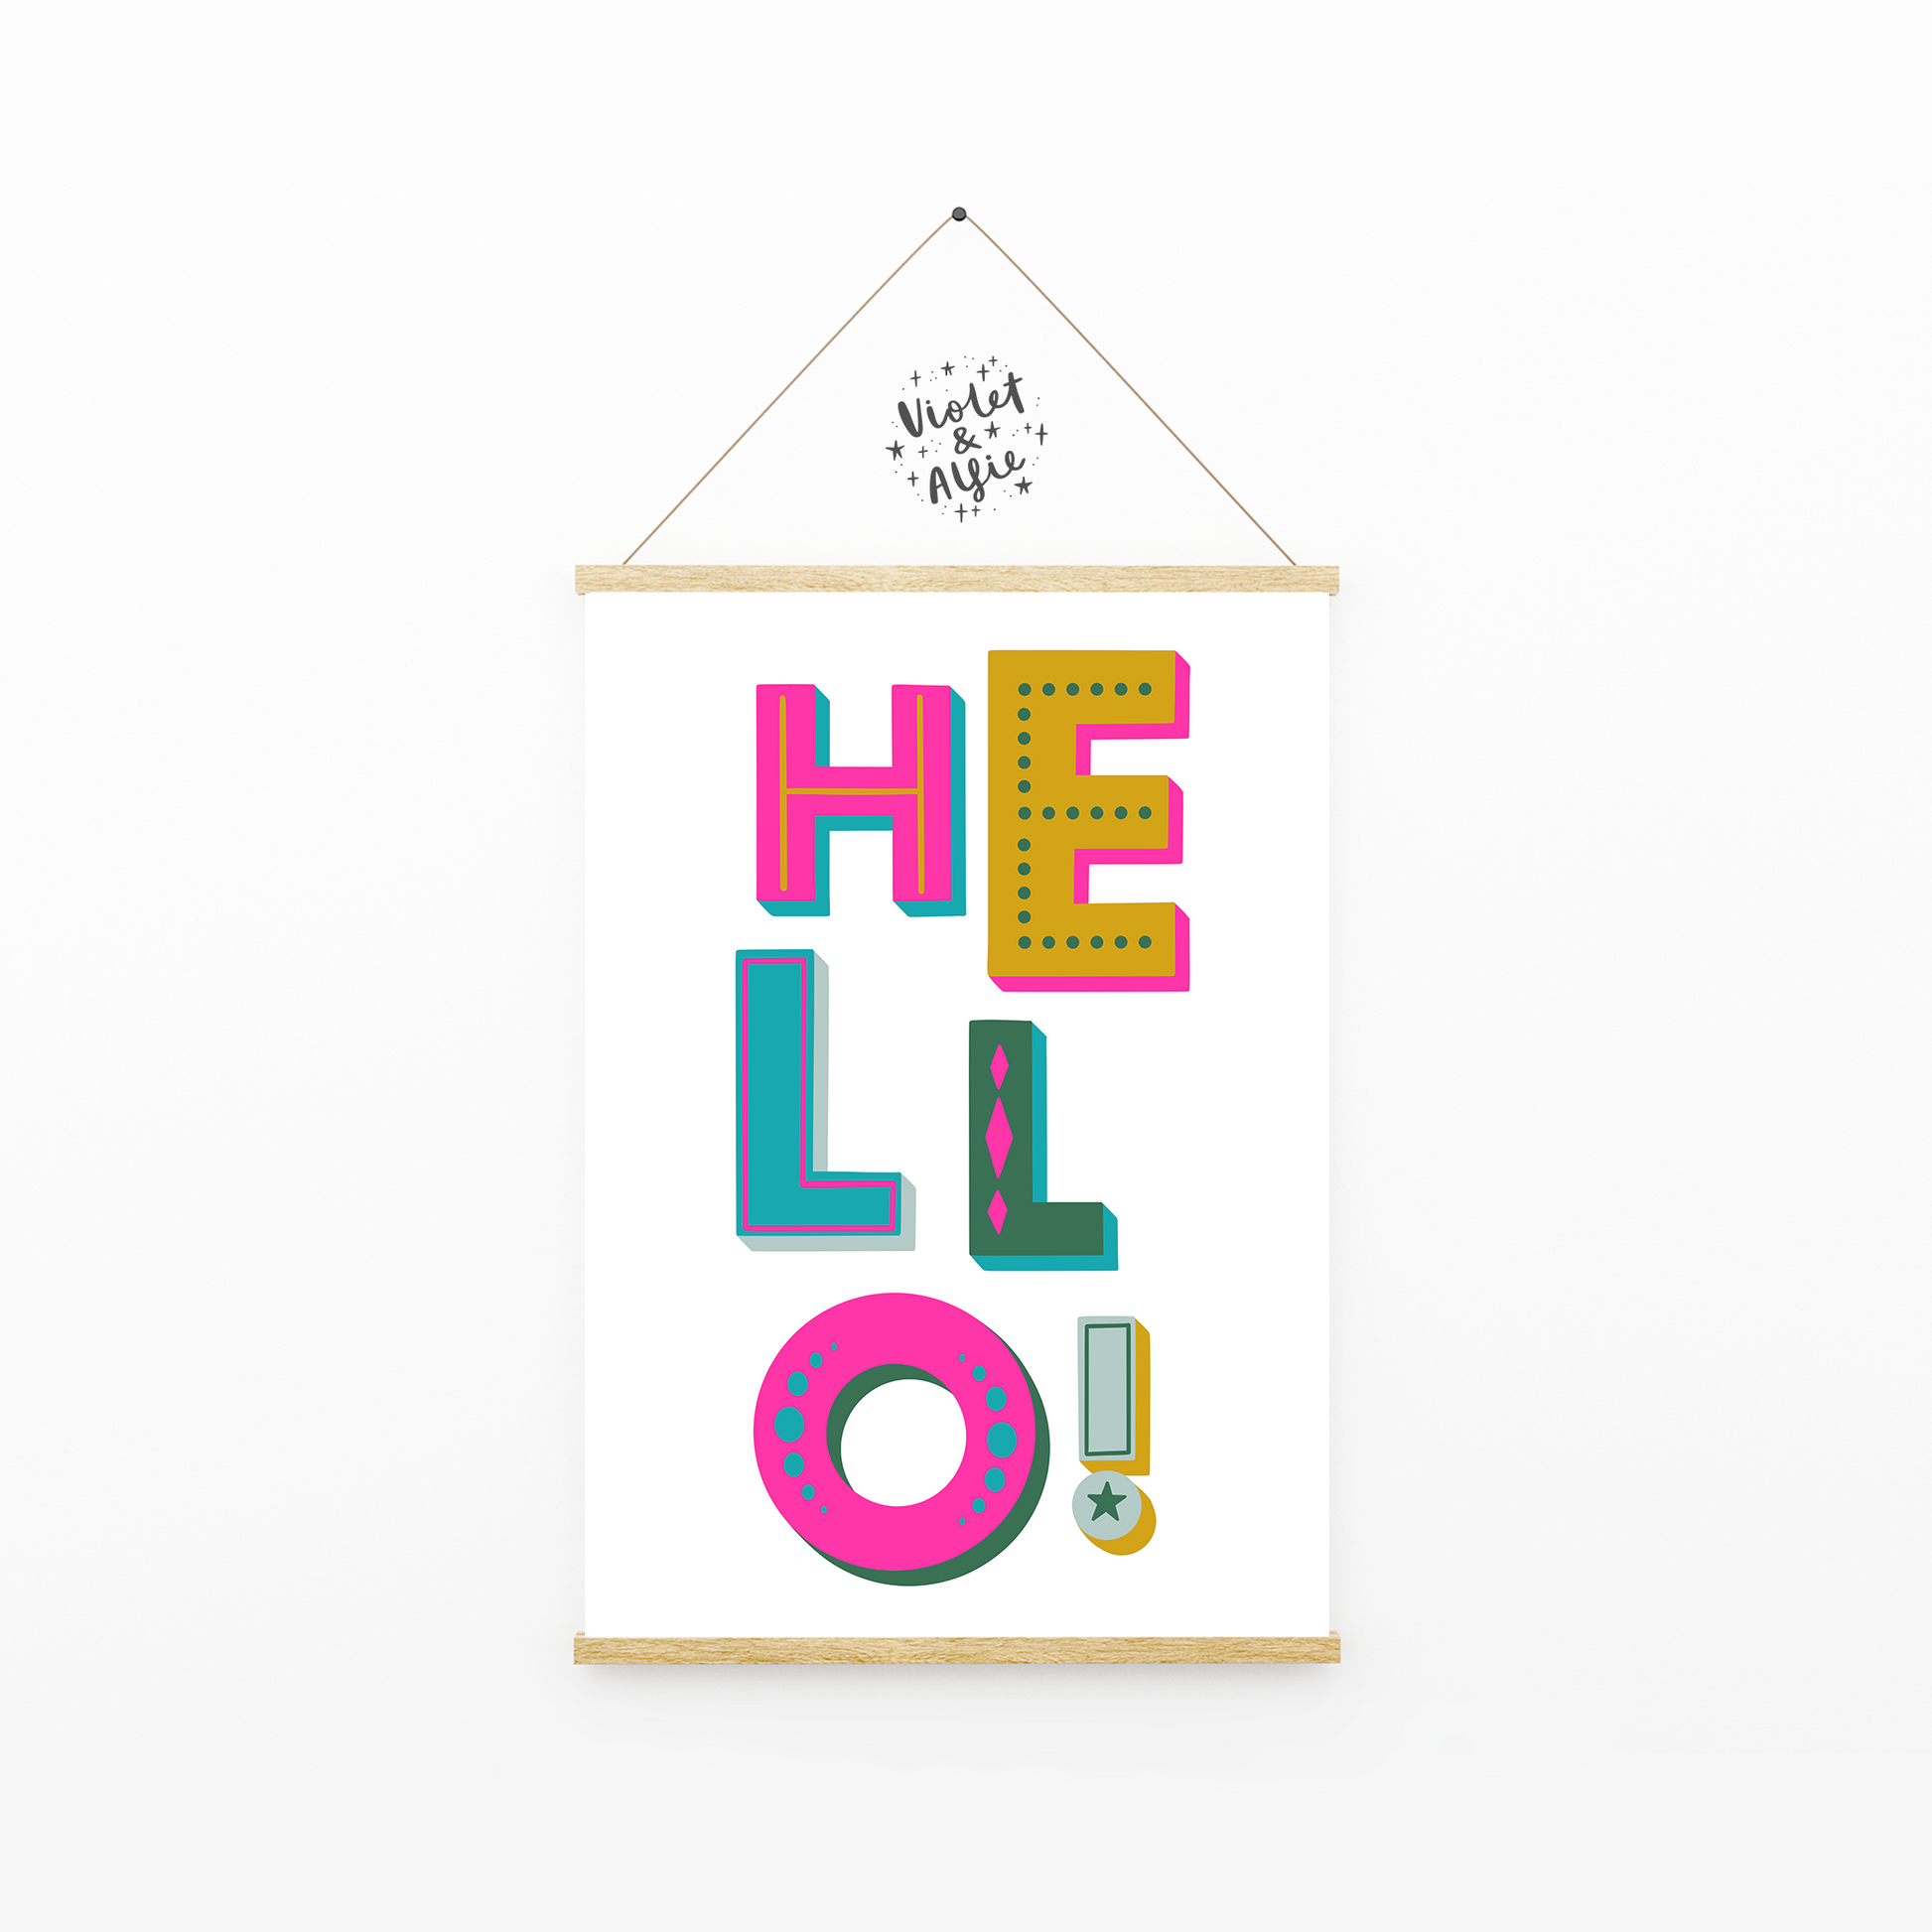 Hello print, prints for hallway, Typographic print, colourful typography, eclectic home decor, bold wall art, quirky prints, typographic magic print, maximalist home decor, clashing colours, prints for your home, quirky prints, gallery wall decor